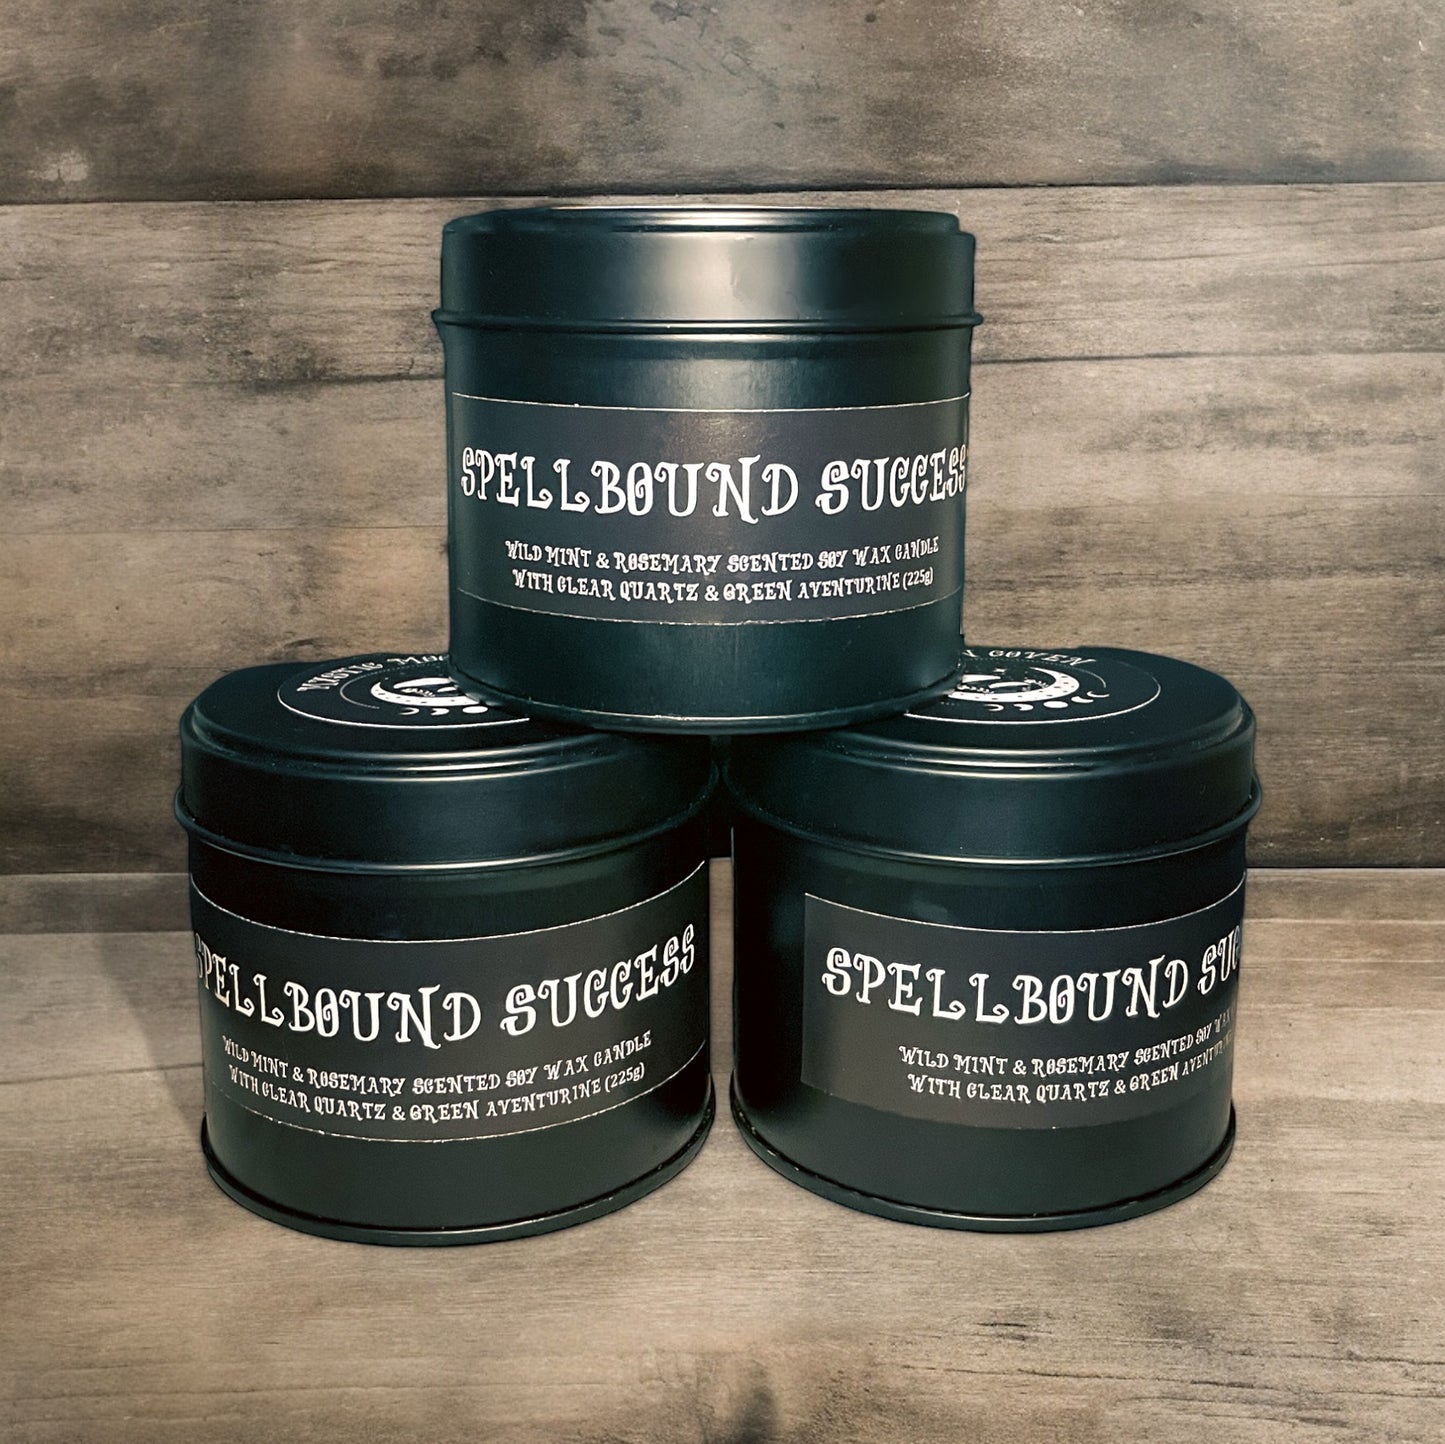 Spellbound Success Luxury Handmade Wild Mint & Rosemary Scented Crystal Infused Candle